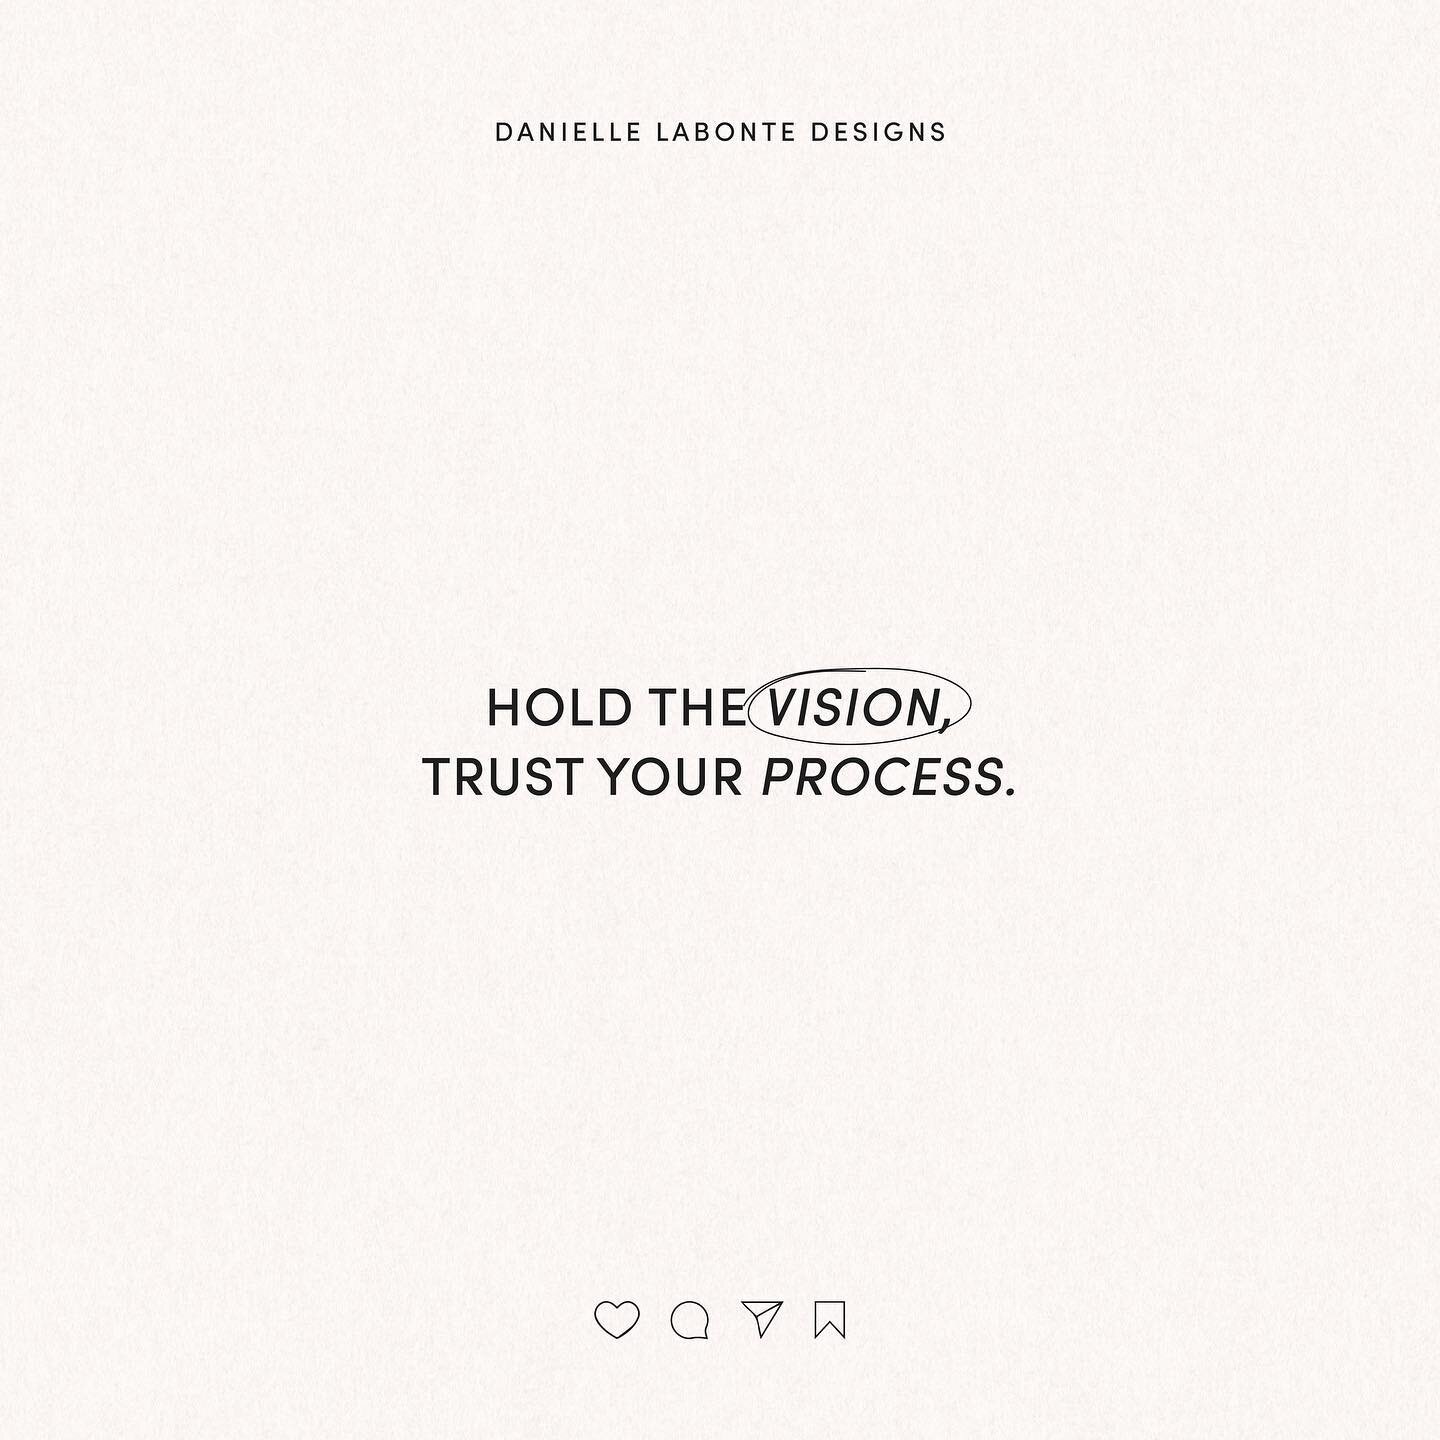 Hold the vision and trust the process 🤍

You know what your vision is, although we can&rsquo;t predict the bumps that may come along the way, you&rsquo;ve already started and that leap was the biggest one you had to make 💭

What&rsquo;s your vision